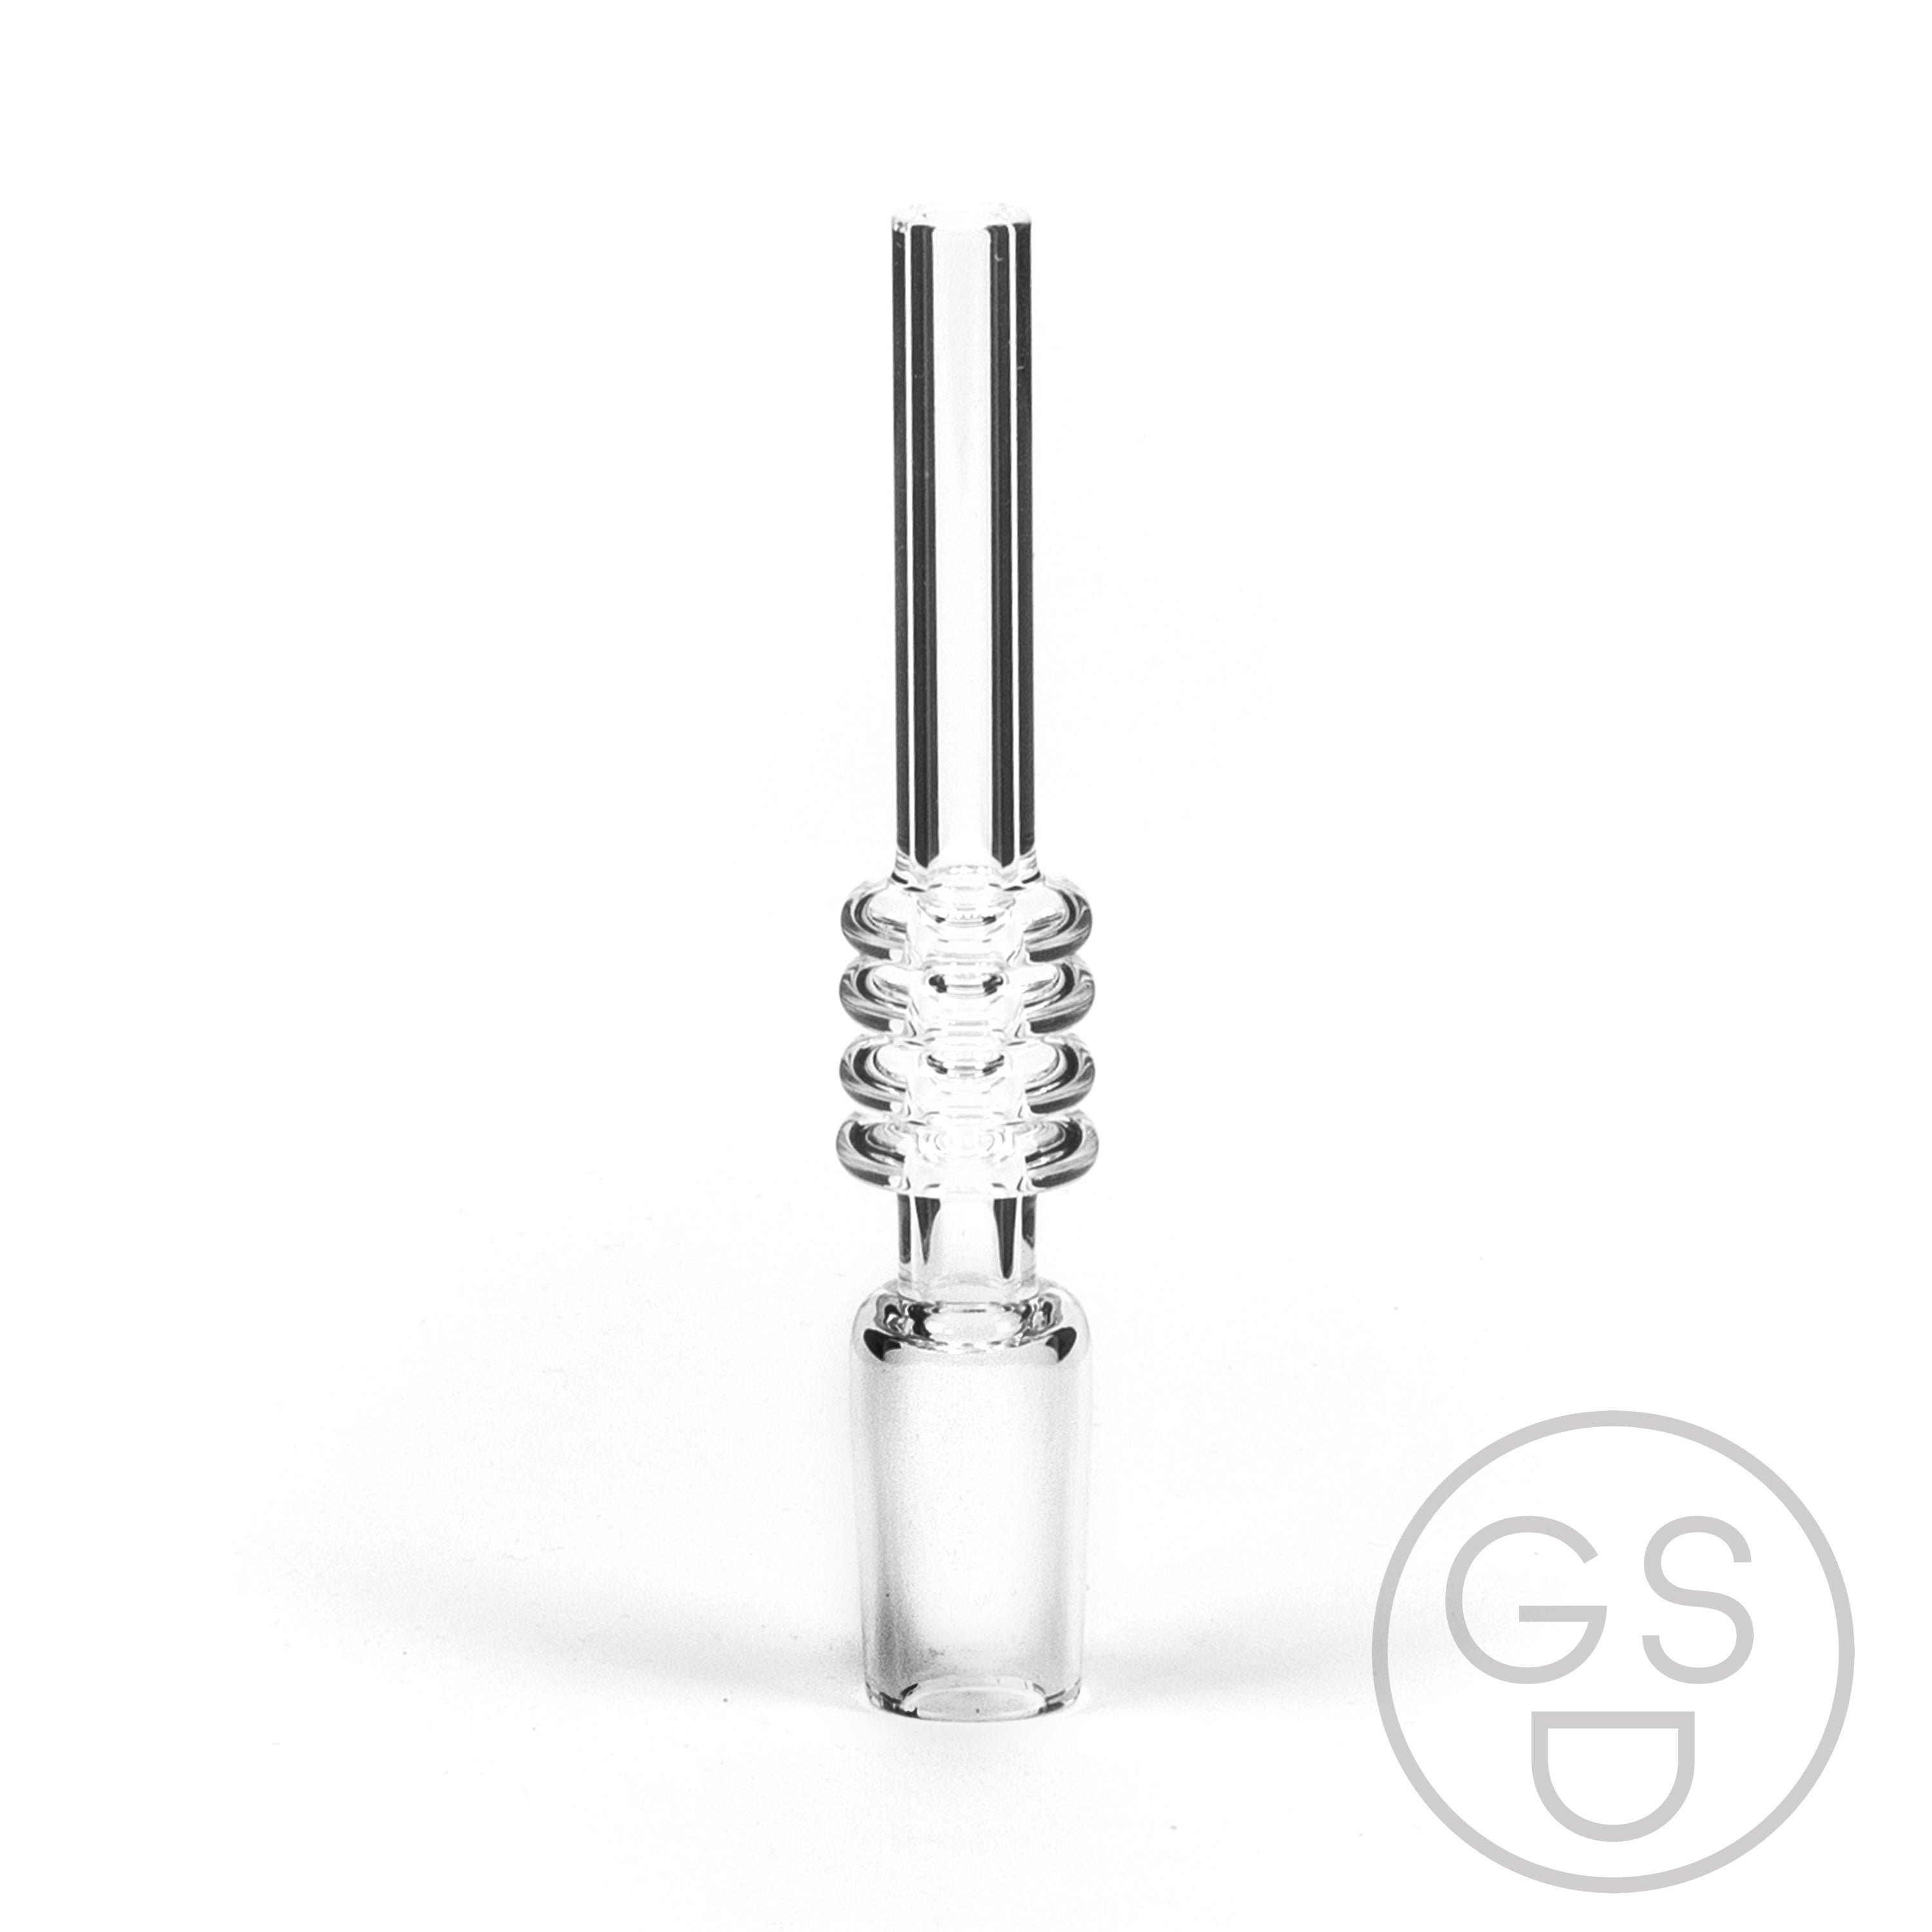 Gypsy Labs Siphonair Mouthpiece - 14mm